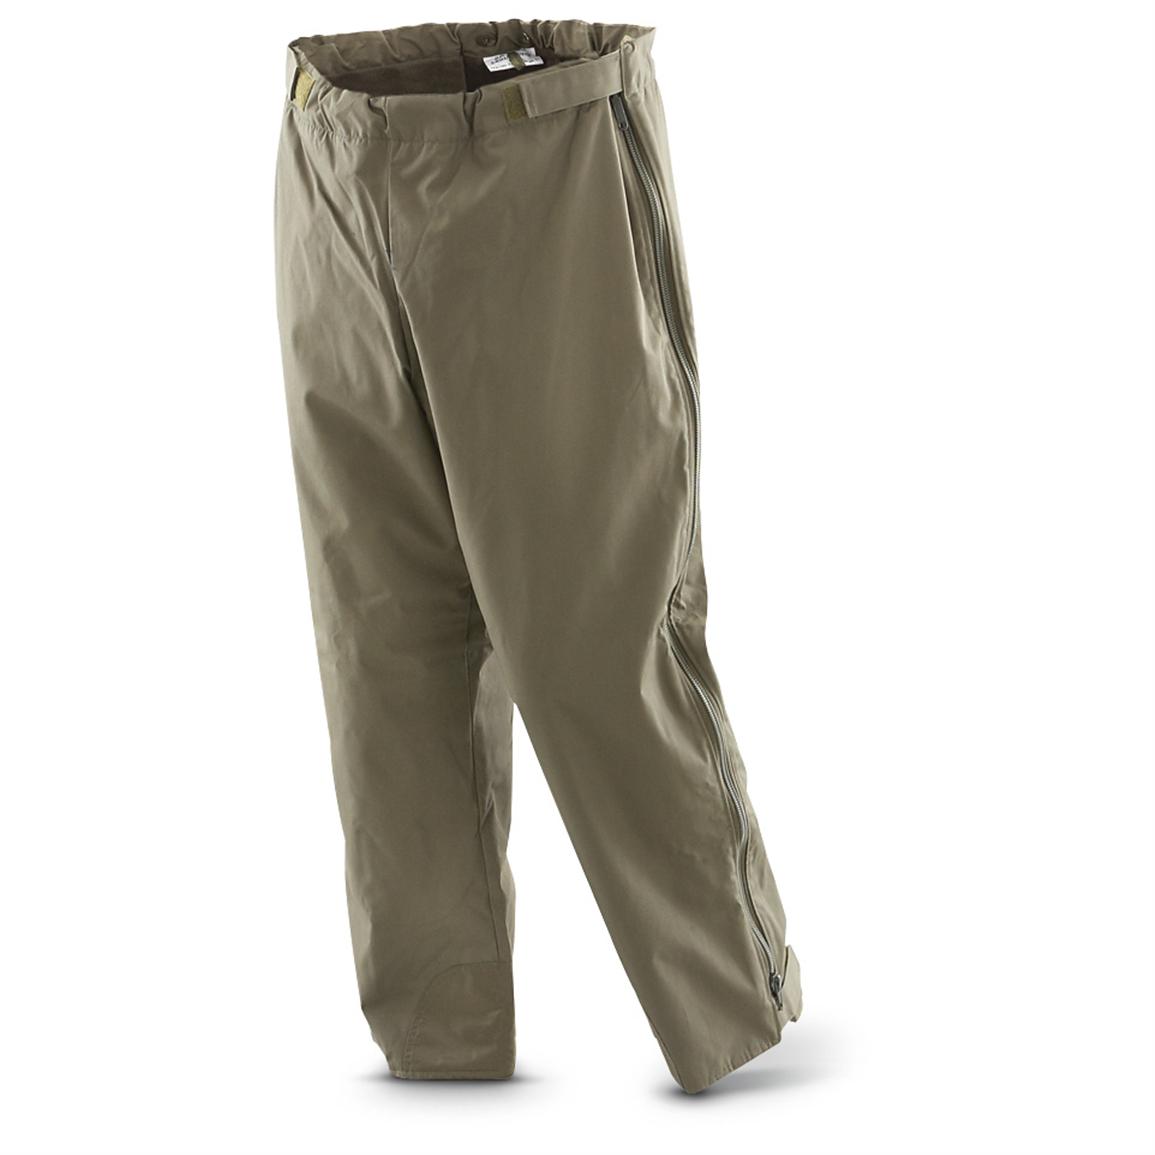 New German Military Surplus Cold Weather Pants - 421213, Pants at ...